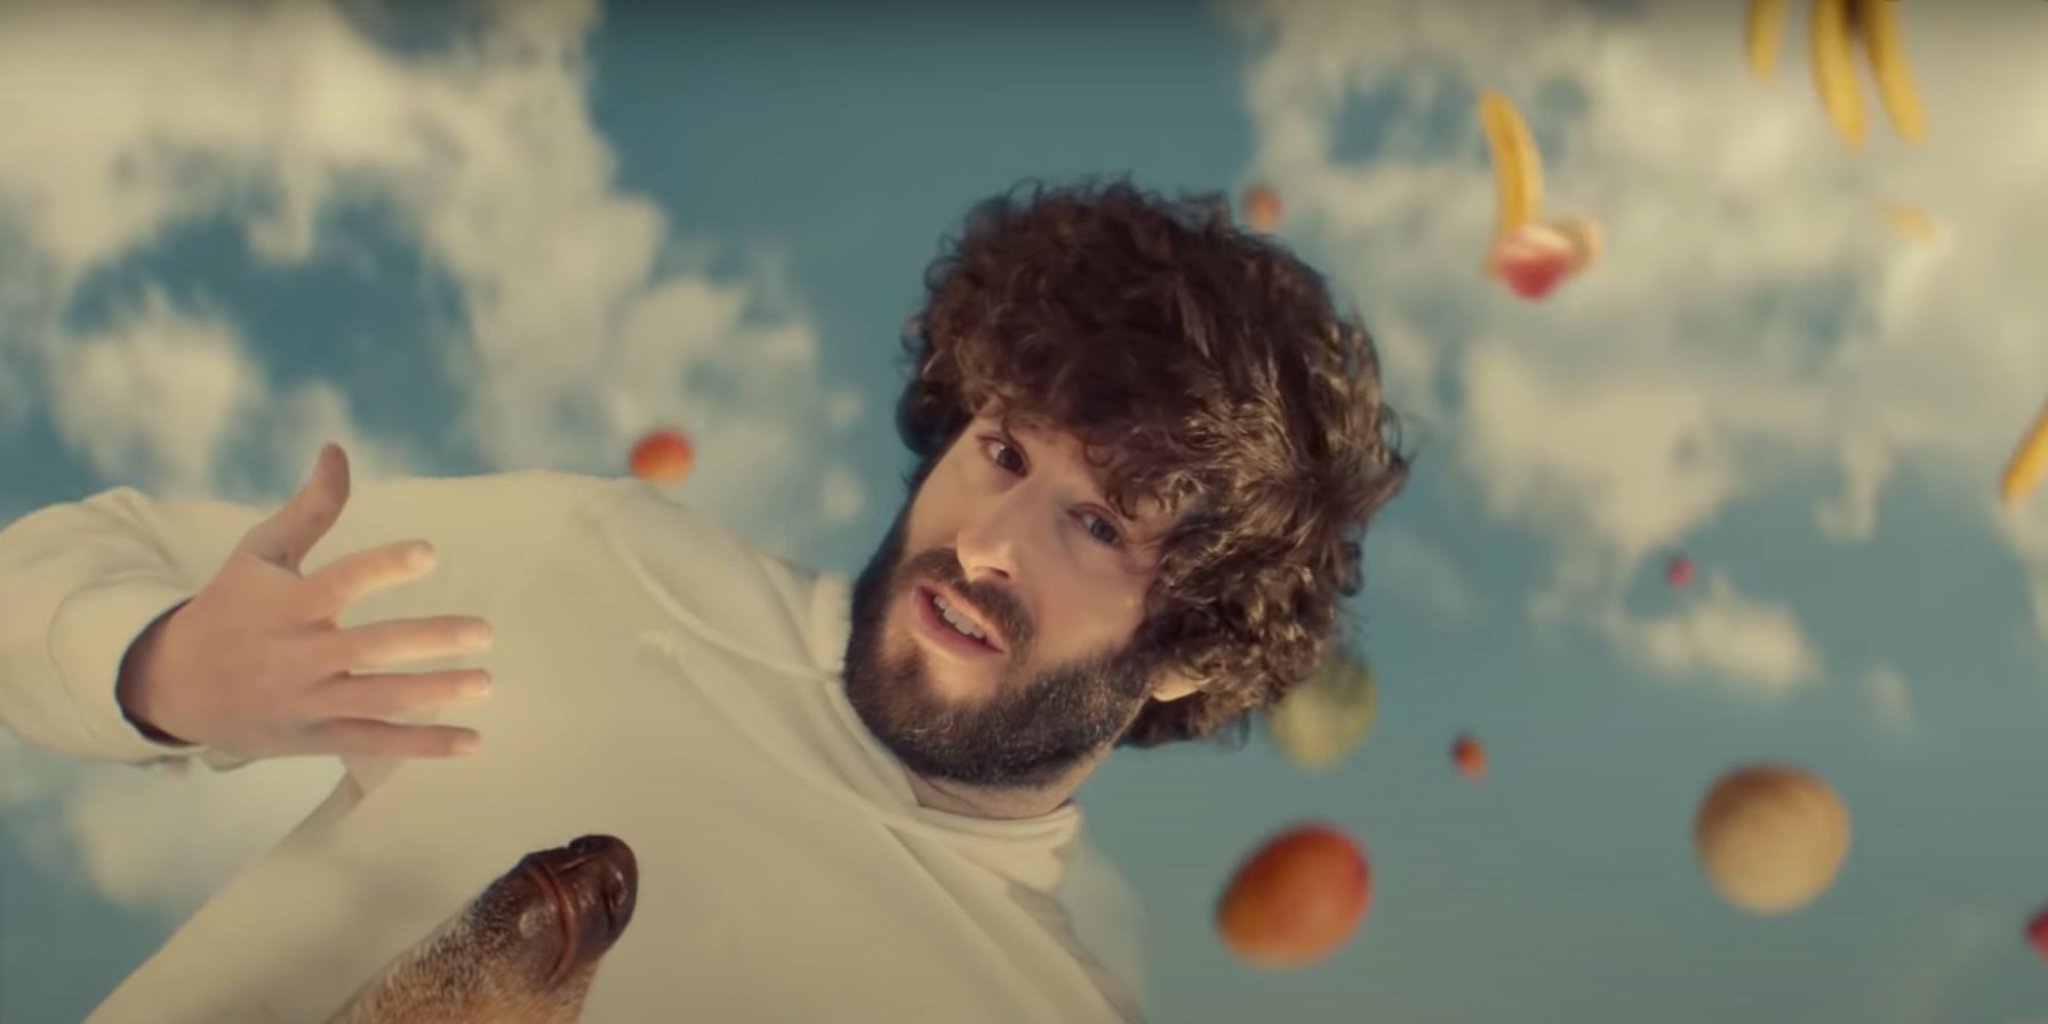 Dave Season 2 Trailer Teases Lil Dicky Making an Album